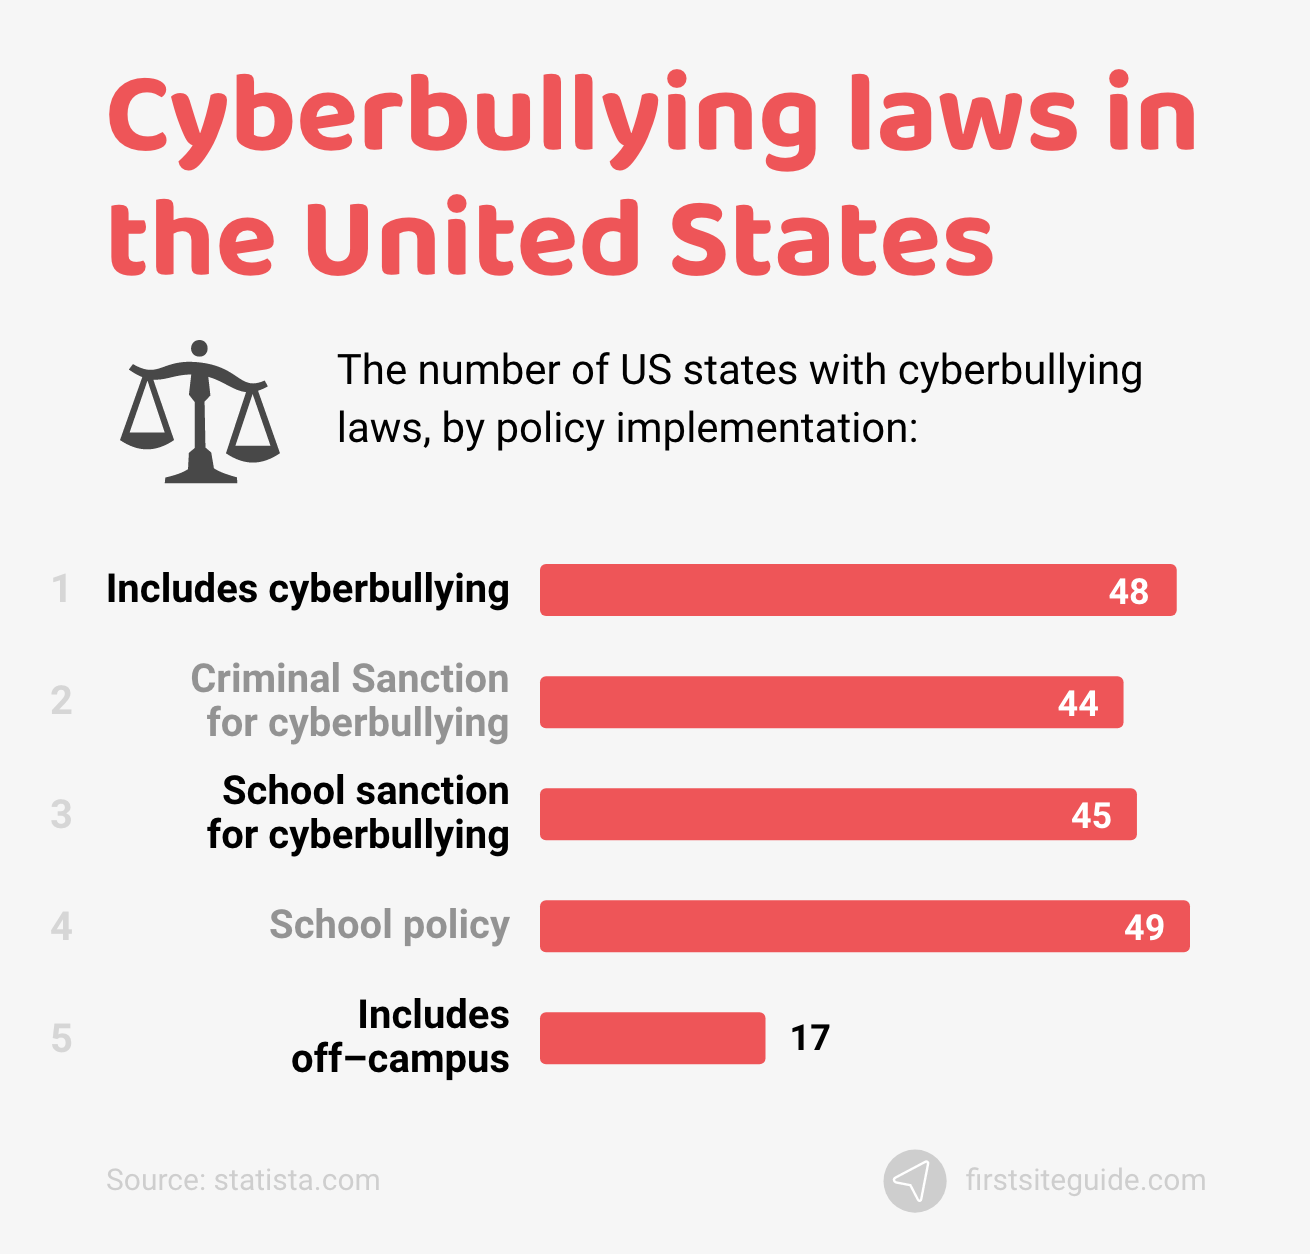 Cyberbullying laws in the United States